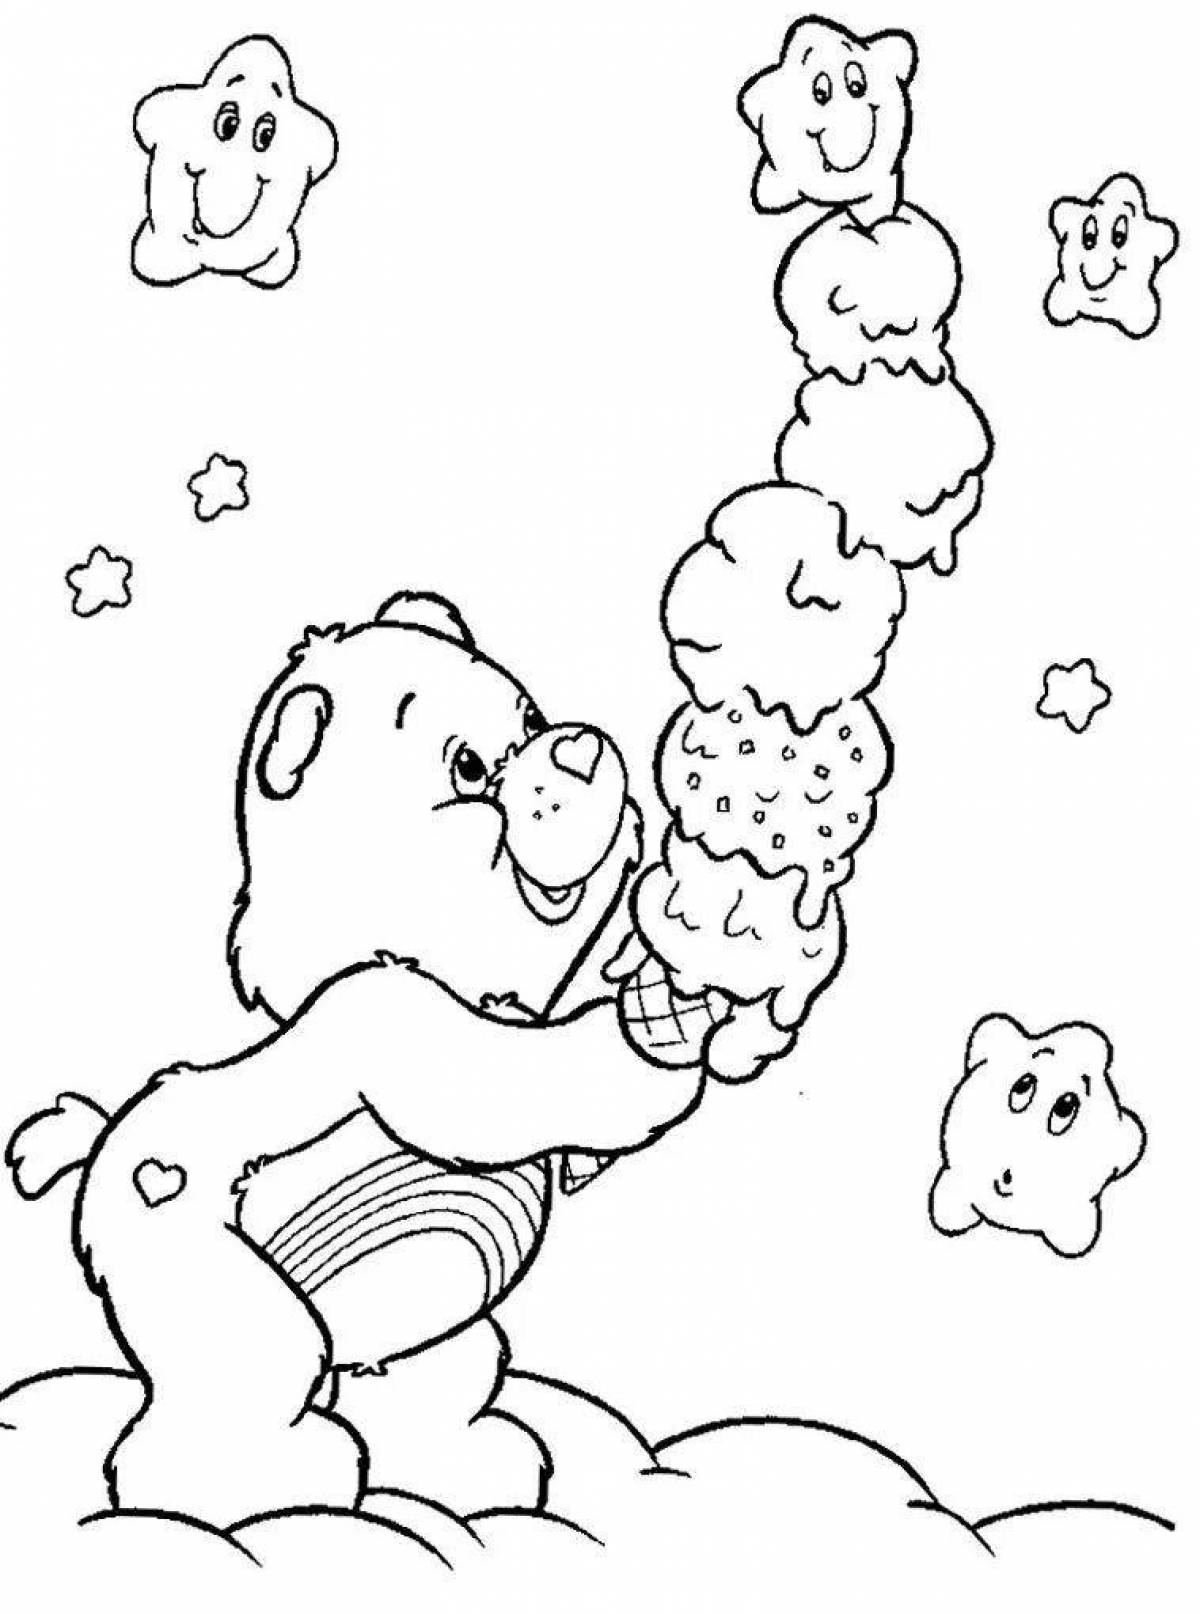 Funny gummy bears coloring page